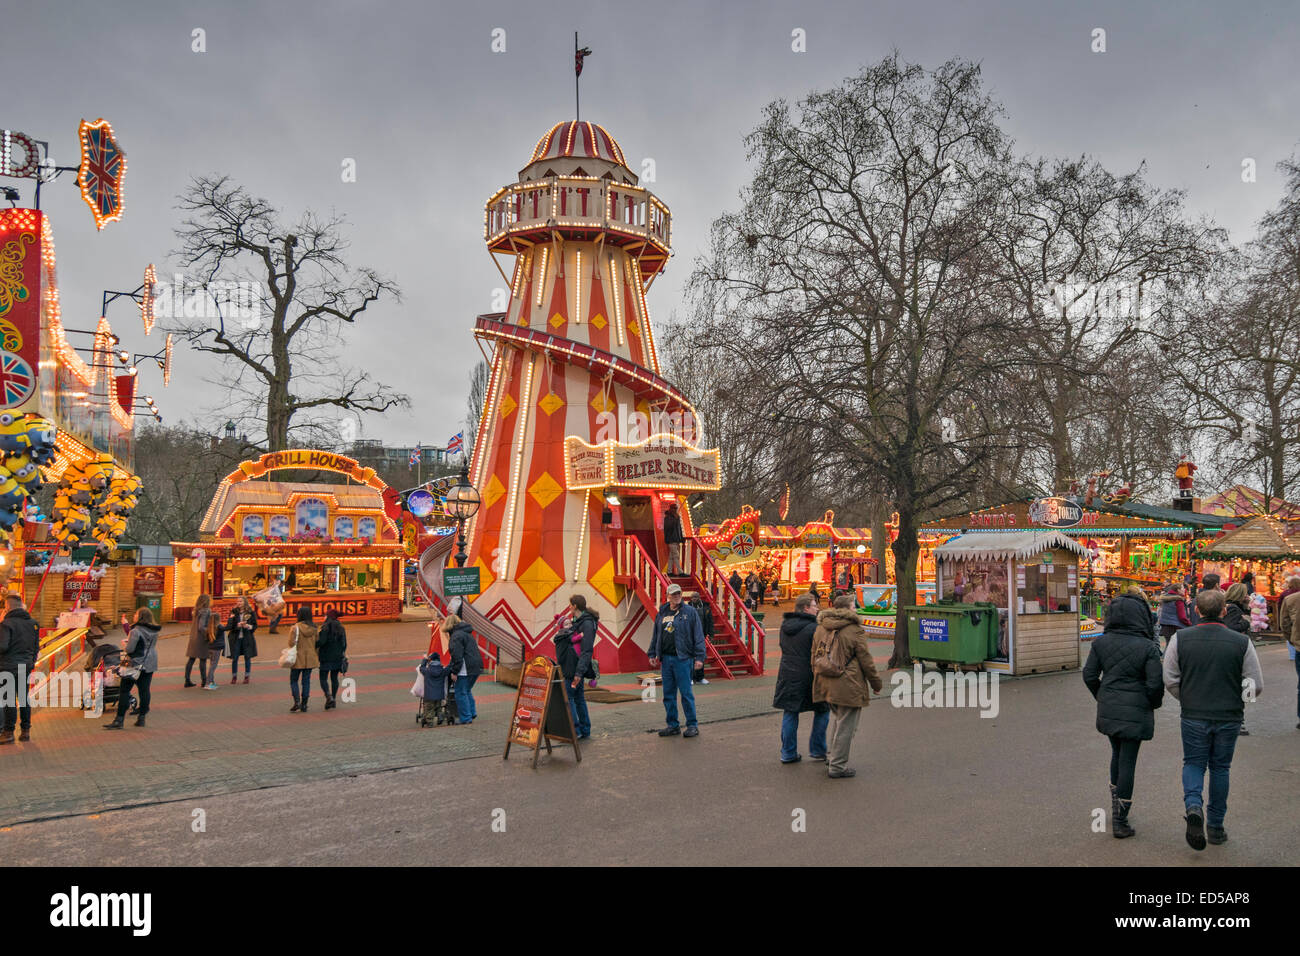 LONDON WINTER WONDERLAND IN HYDE PARK A LANE WITH HELTER SKELTER AND FOOD STALLS Stock Photo